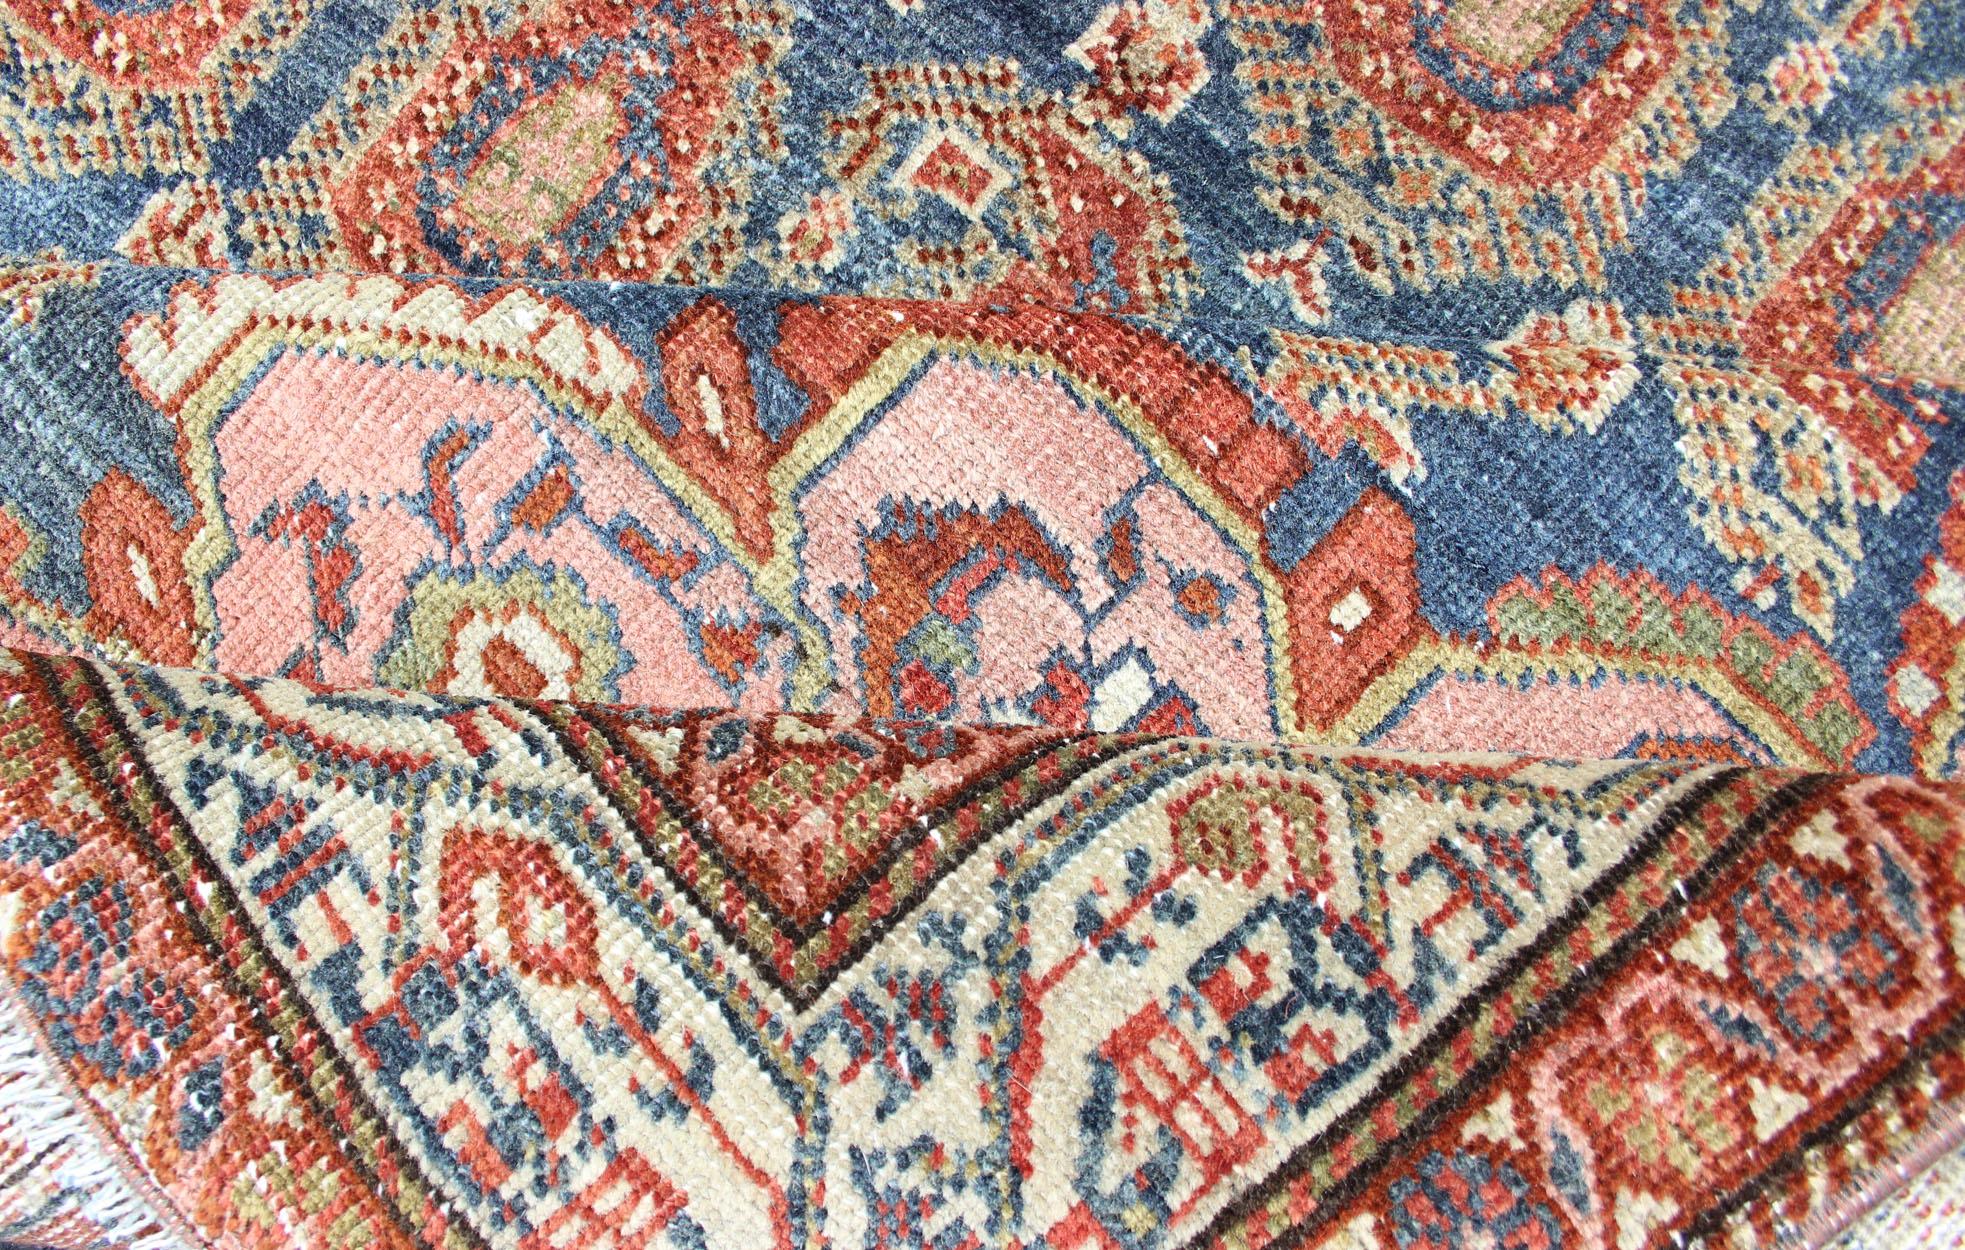 Antique Persian Hamadan rug with gorgeous Caribbean blue and colorful paisleys. rug R20-0718-273, country of origin / type: Iran / Hamadan, circa 1910.

This antique Persian Hamadan rug (circa early 20th century) features a unique blend of colors